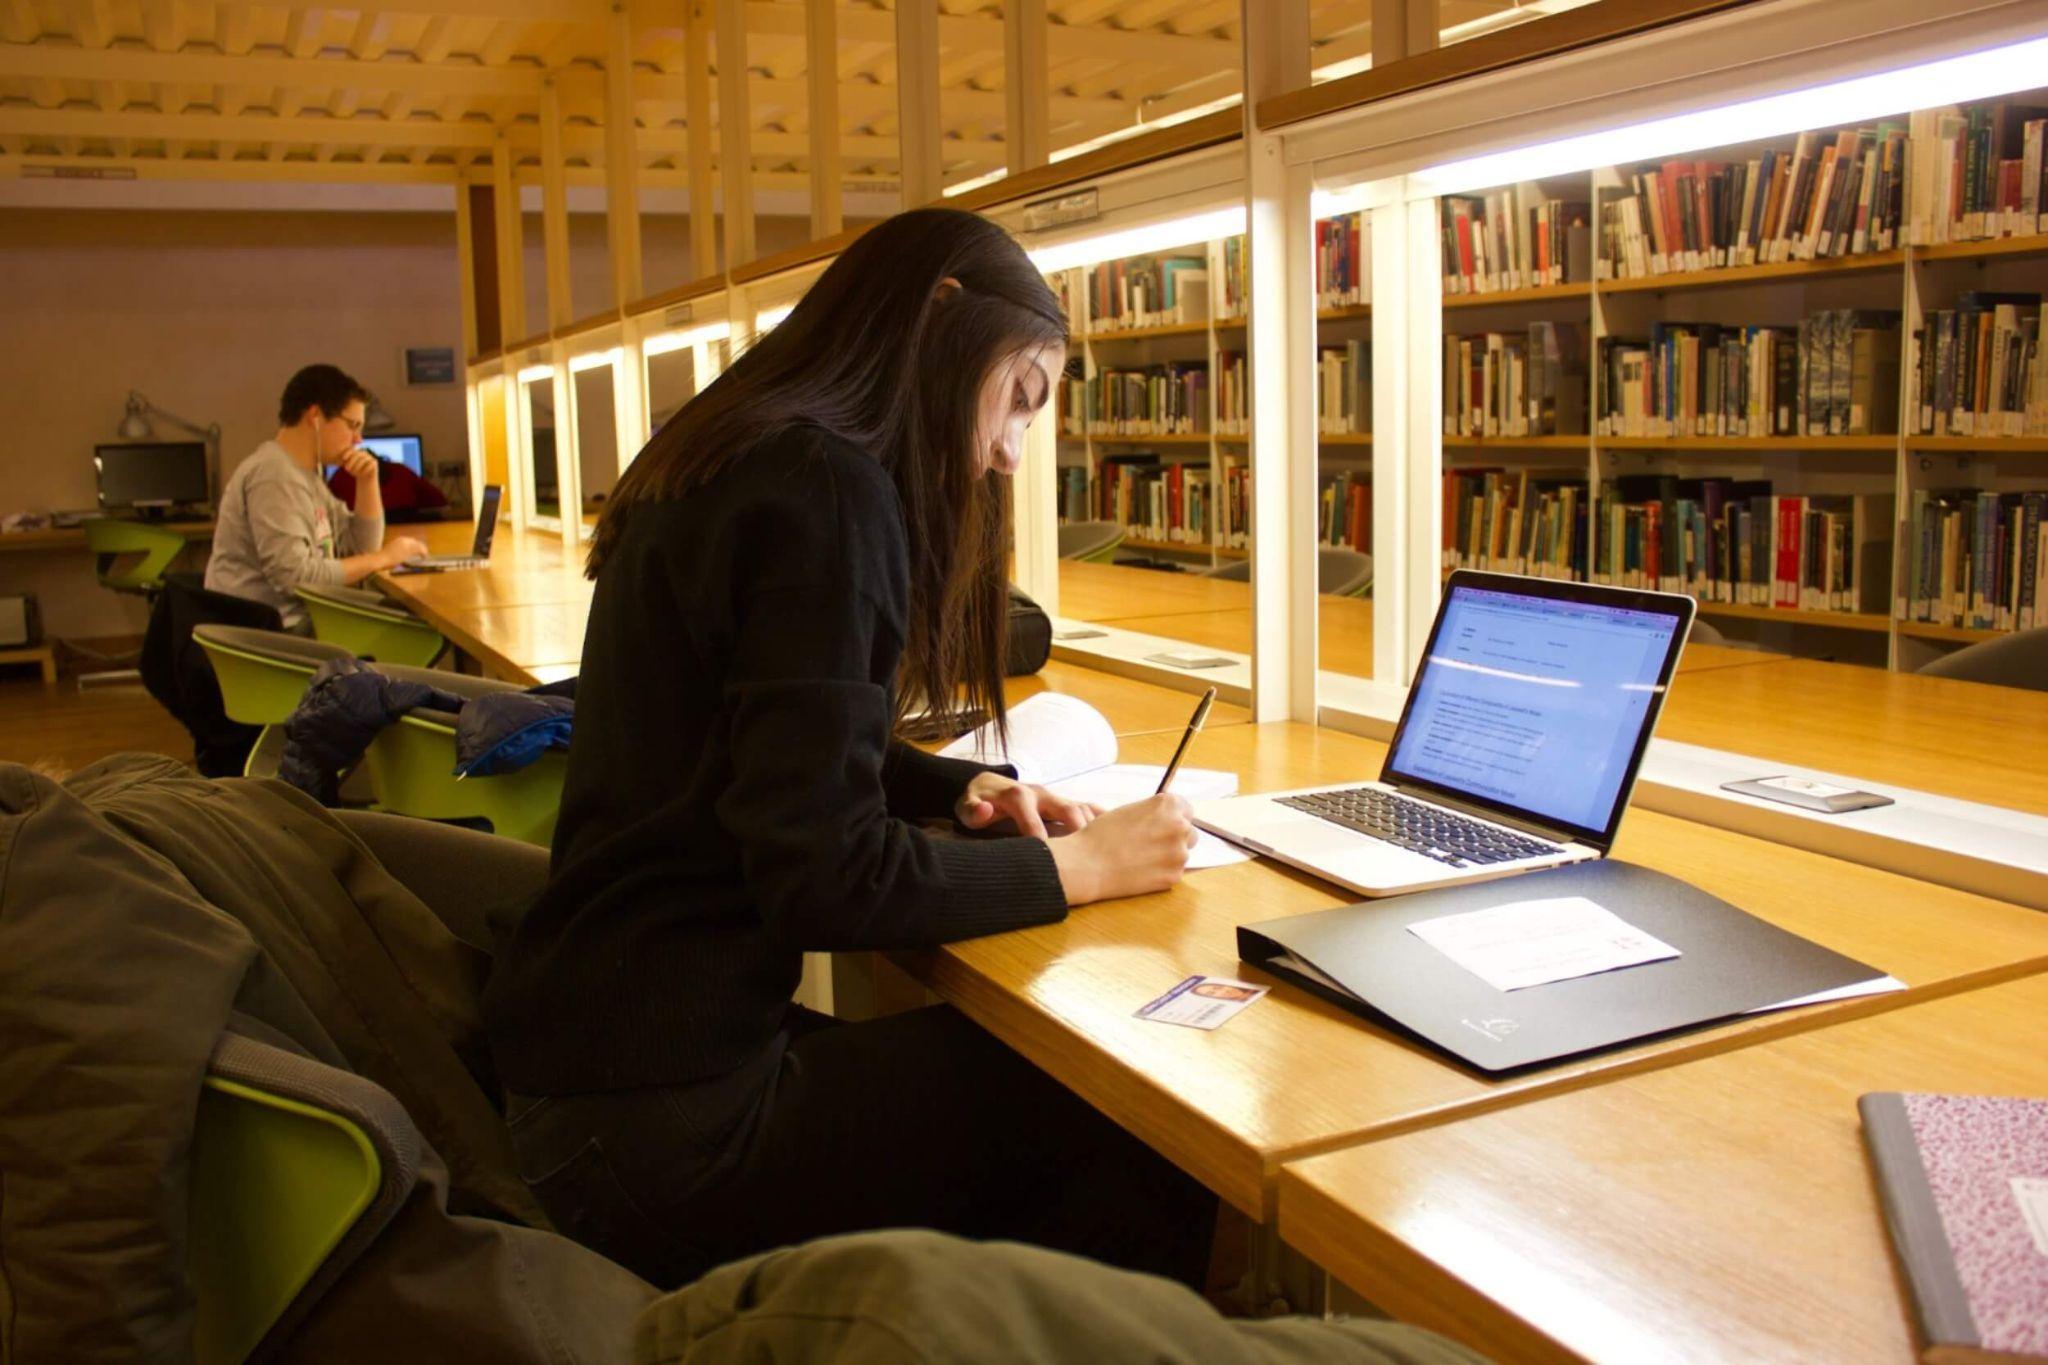 A student attending university in Rome studying in the library.